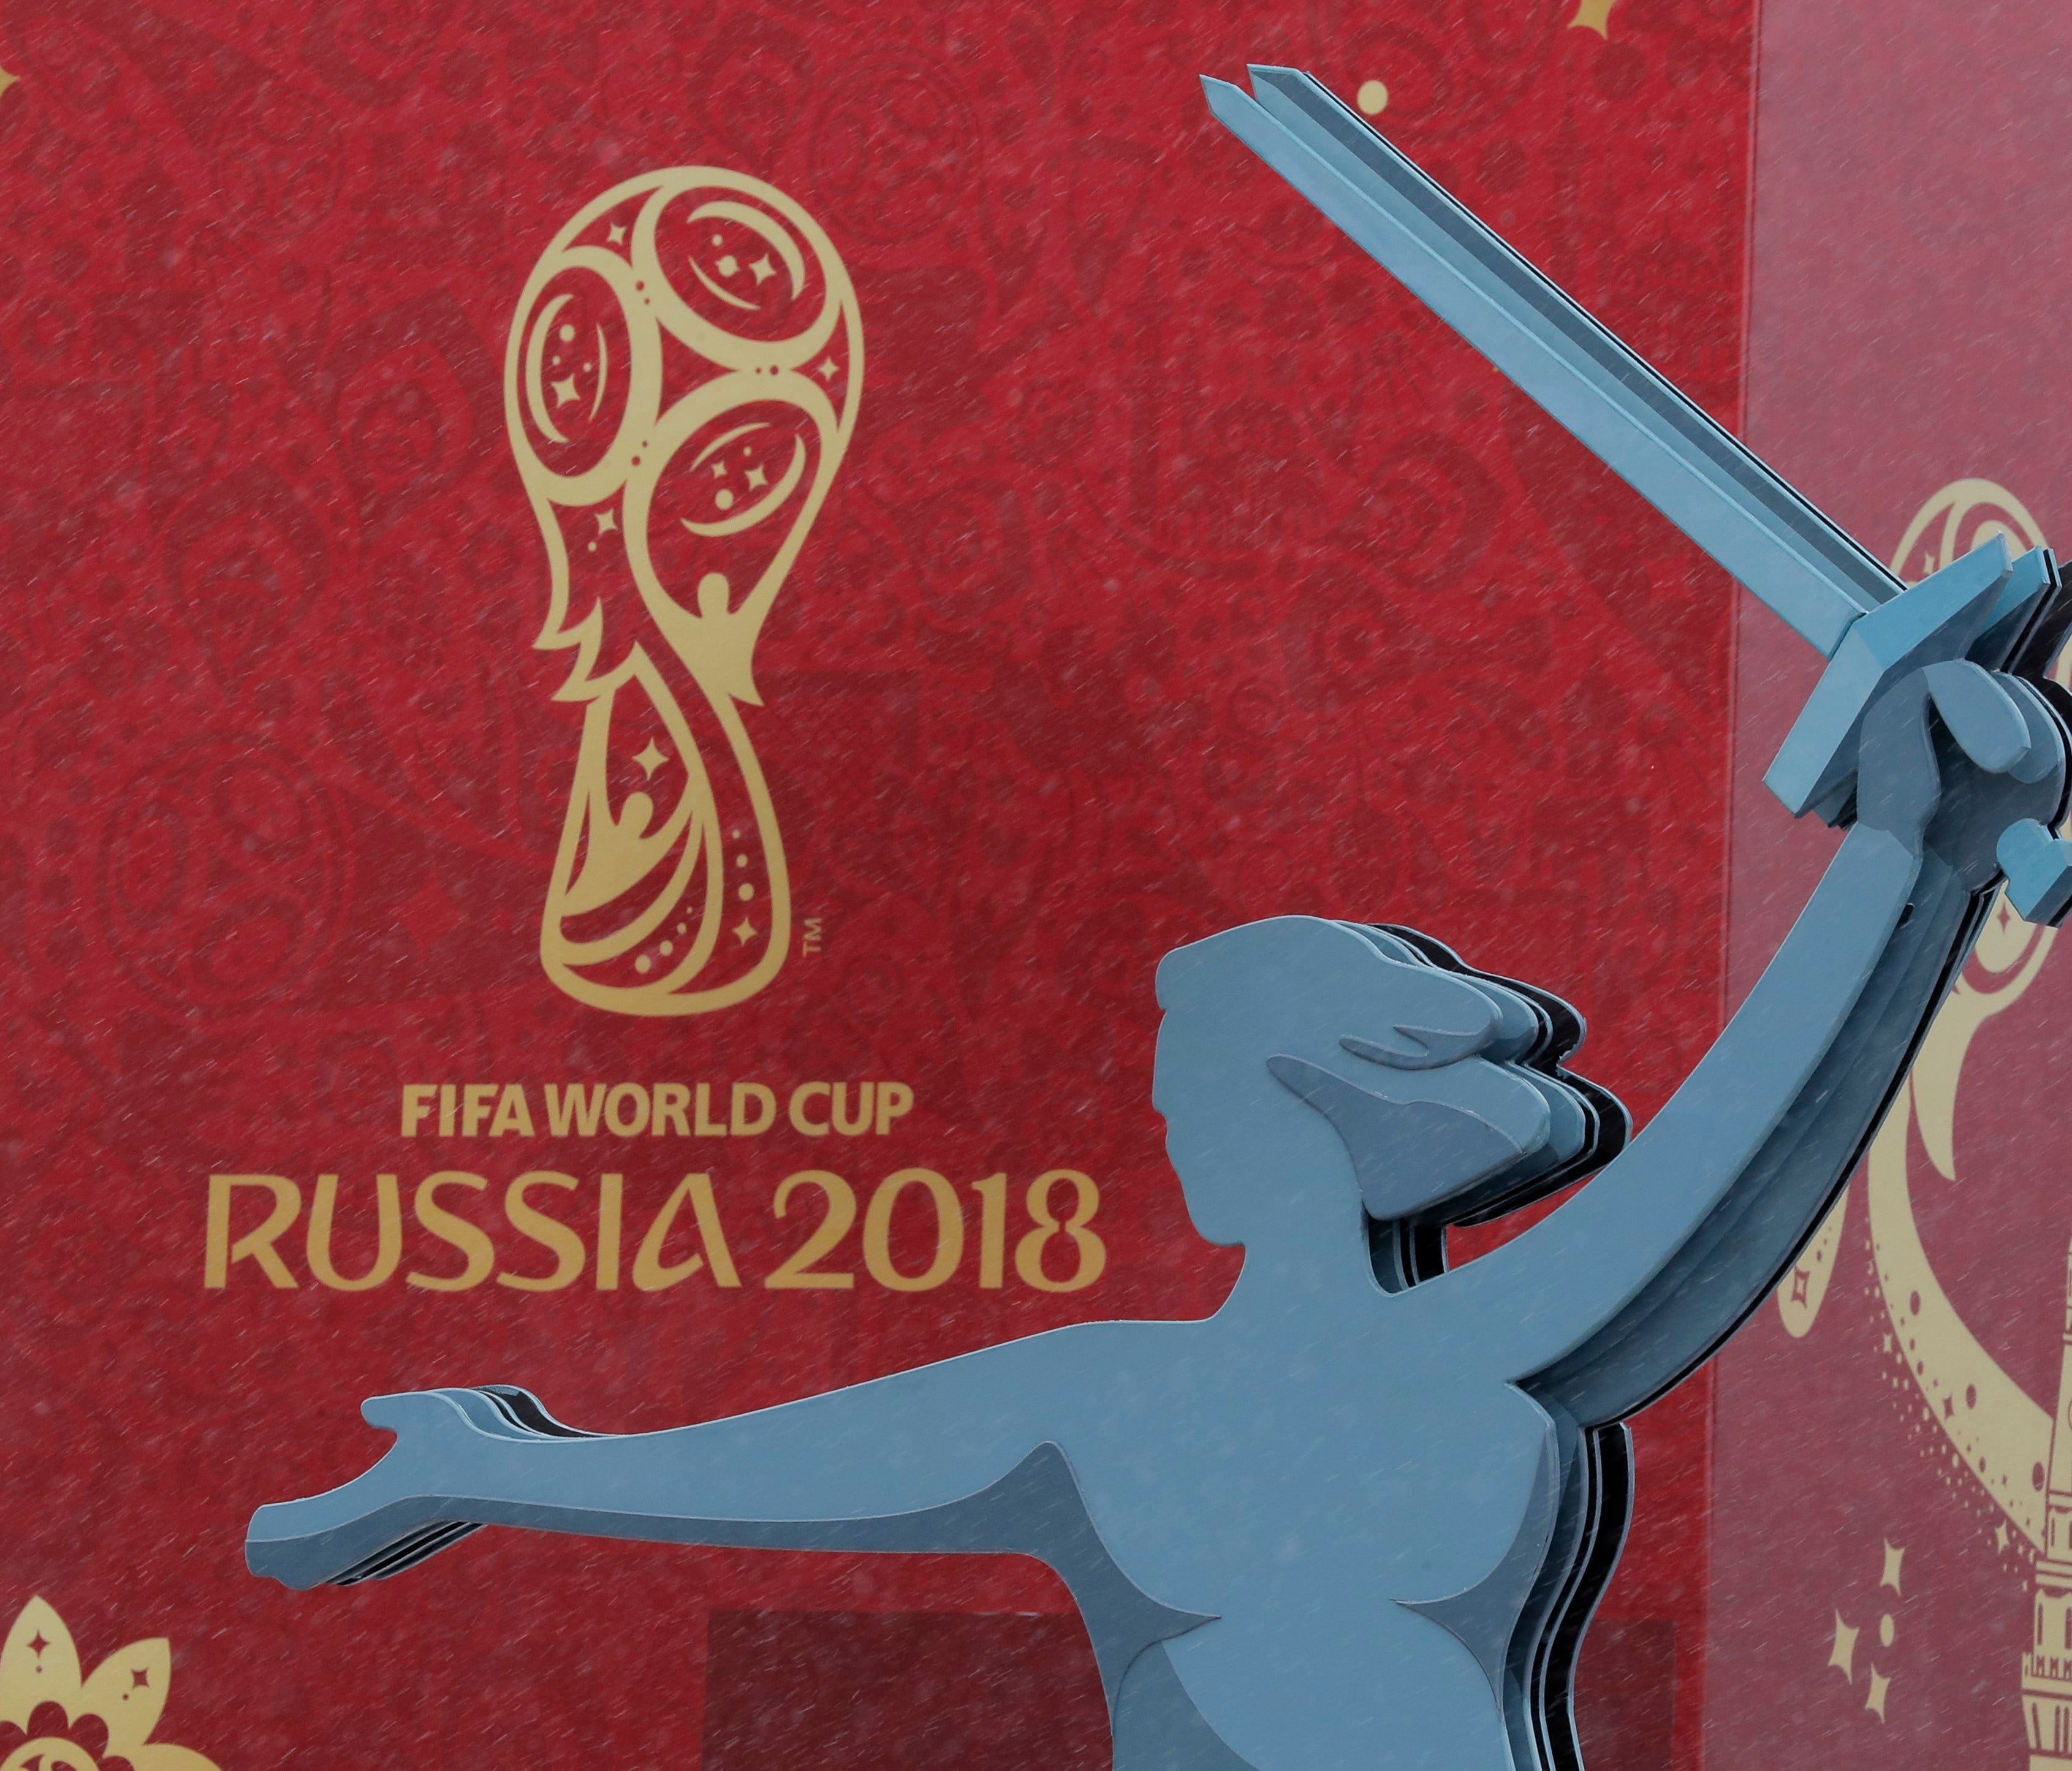 A view of the World Cup logo in Moscow.